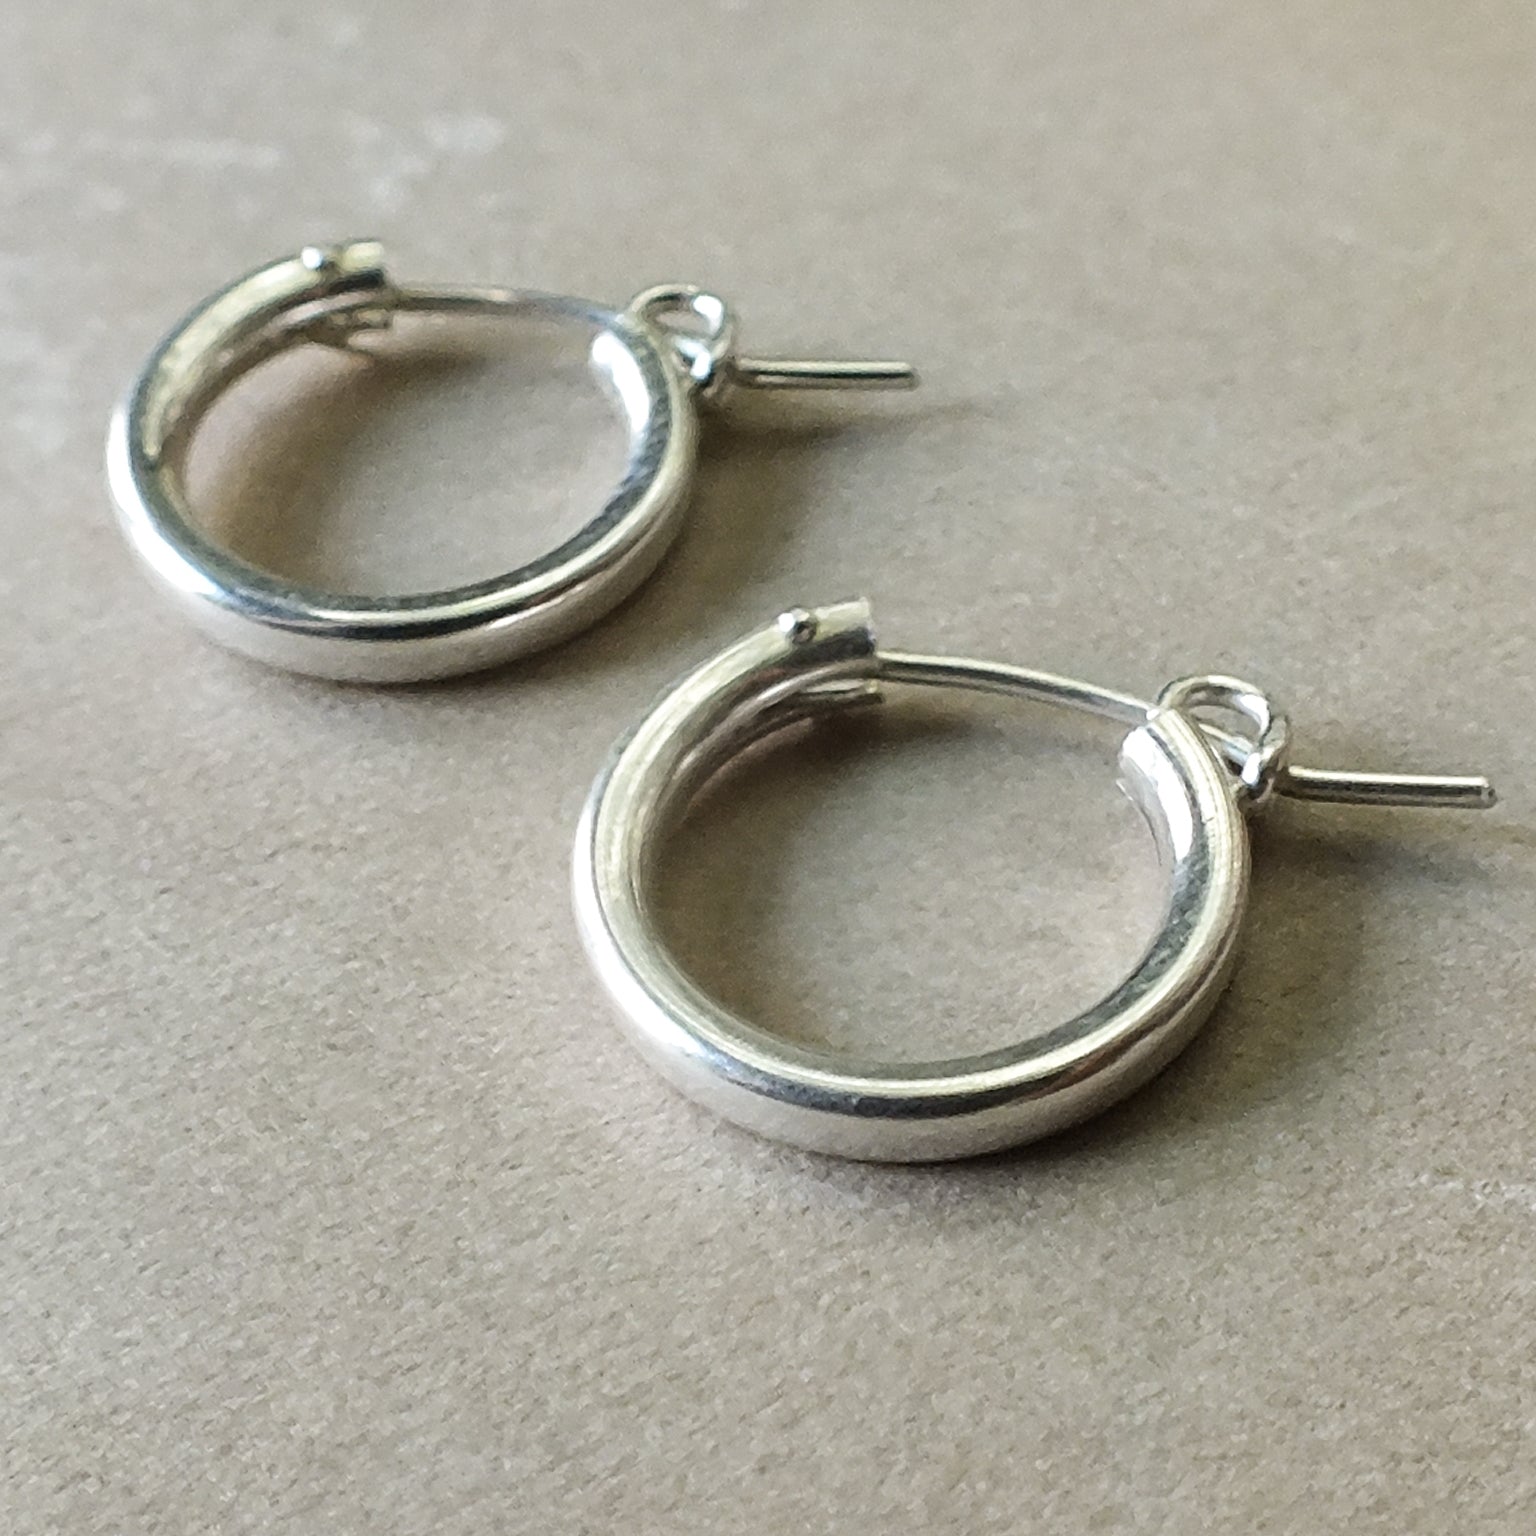 A pair of Becoming Jewelry Everyday Hoop Earrings, medium on a beige surface.